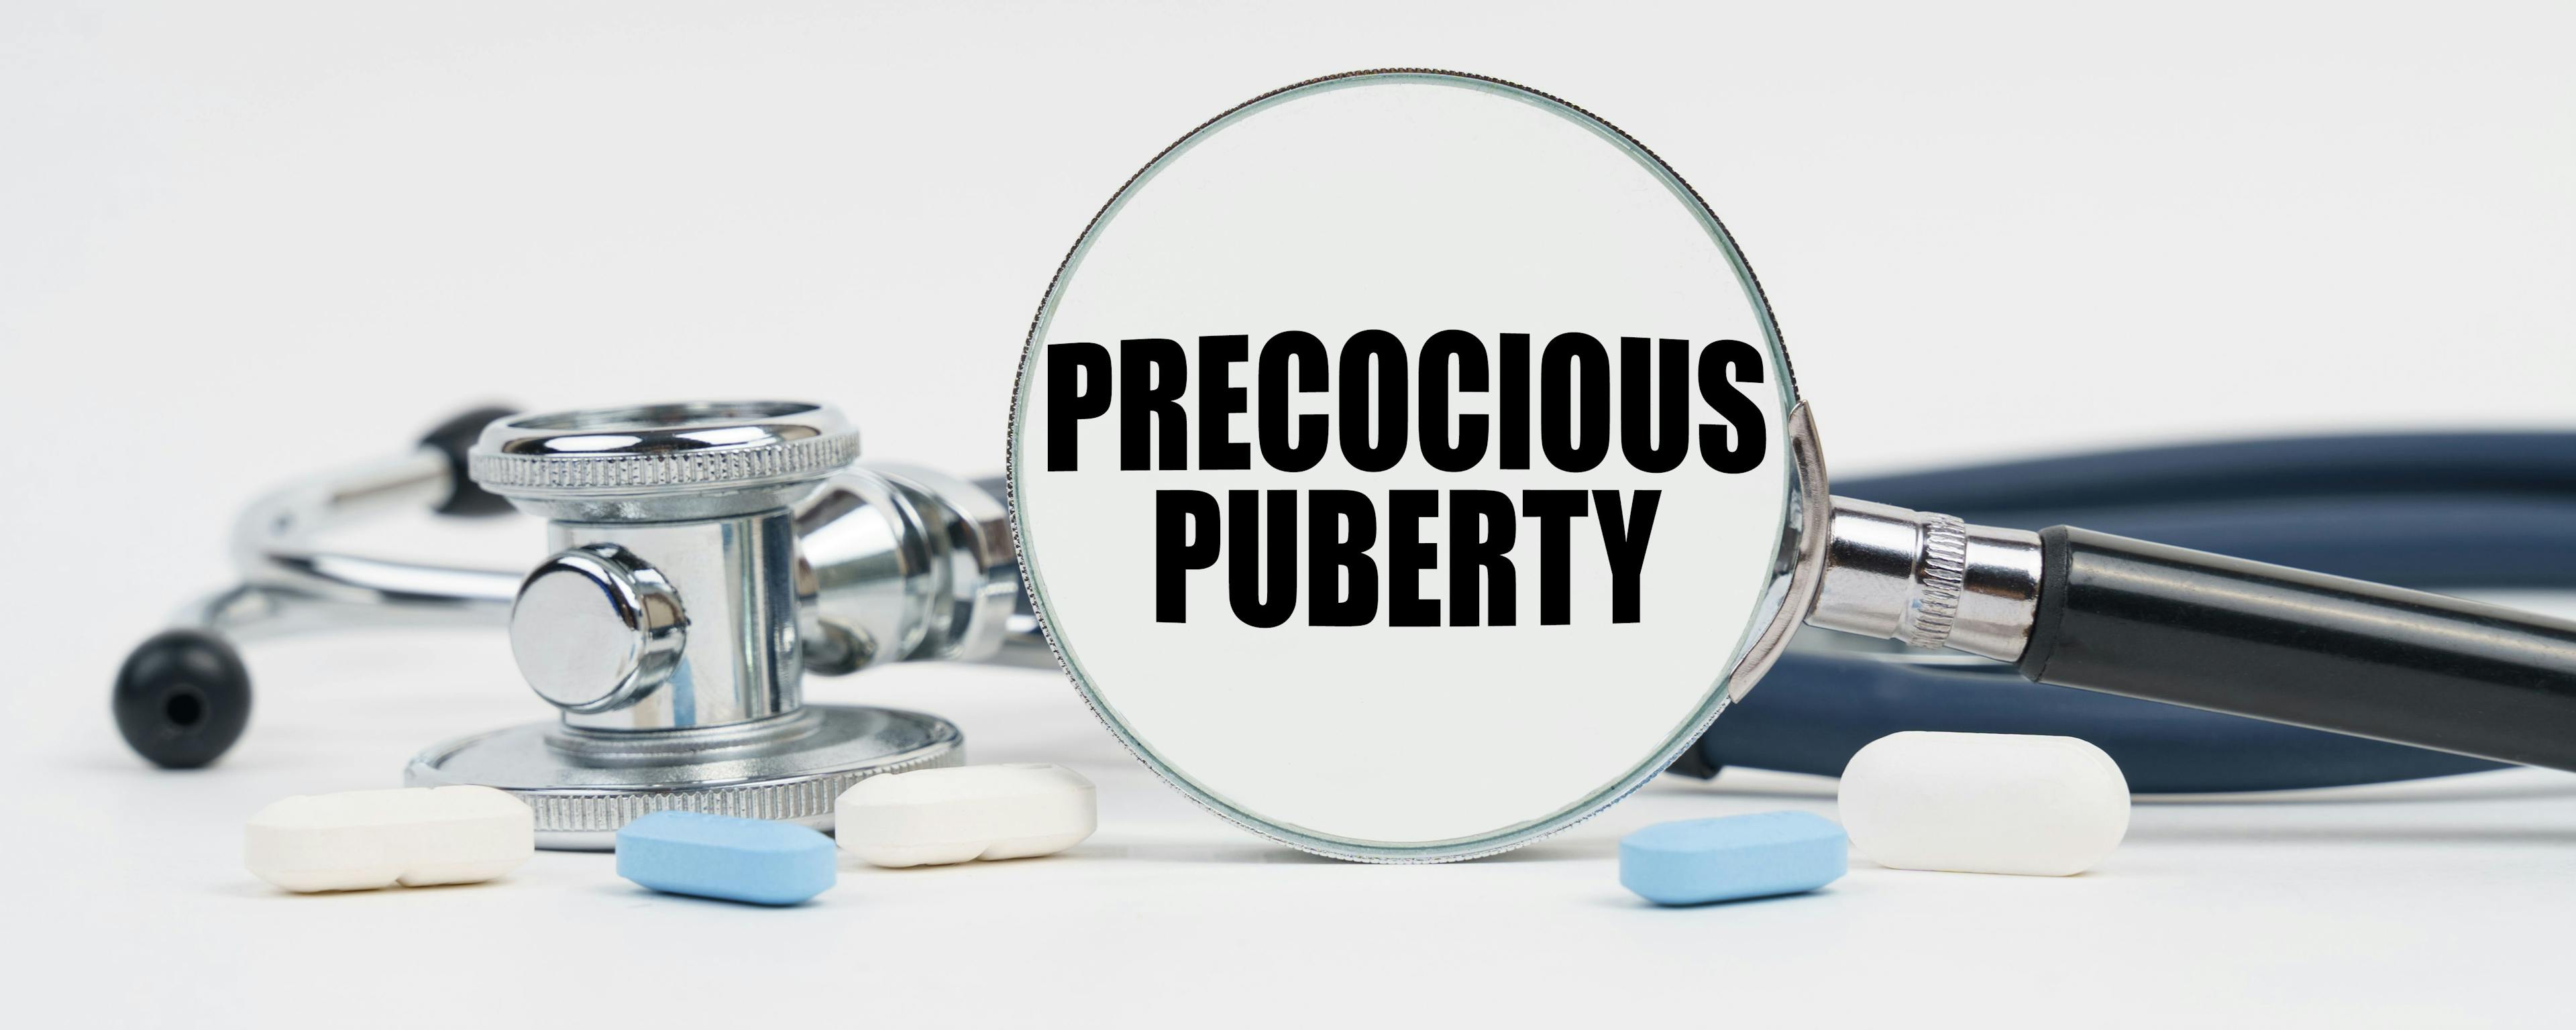 DSMB recommends continuation of phase 3 trial evaluating central precocious puberty treatment | Image Credit: © Dzmitry - © Dzmitry - stock.adobe.com.